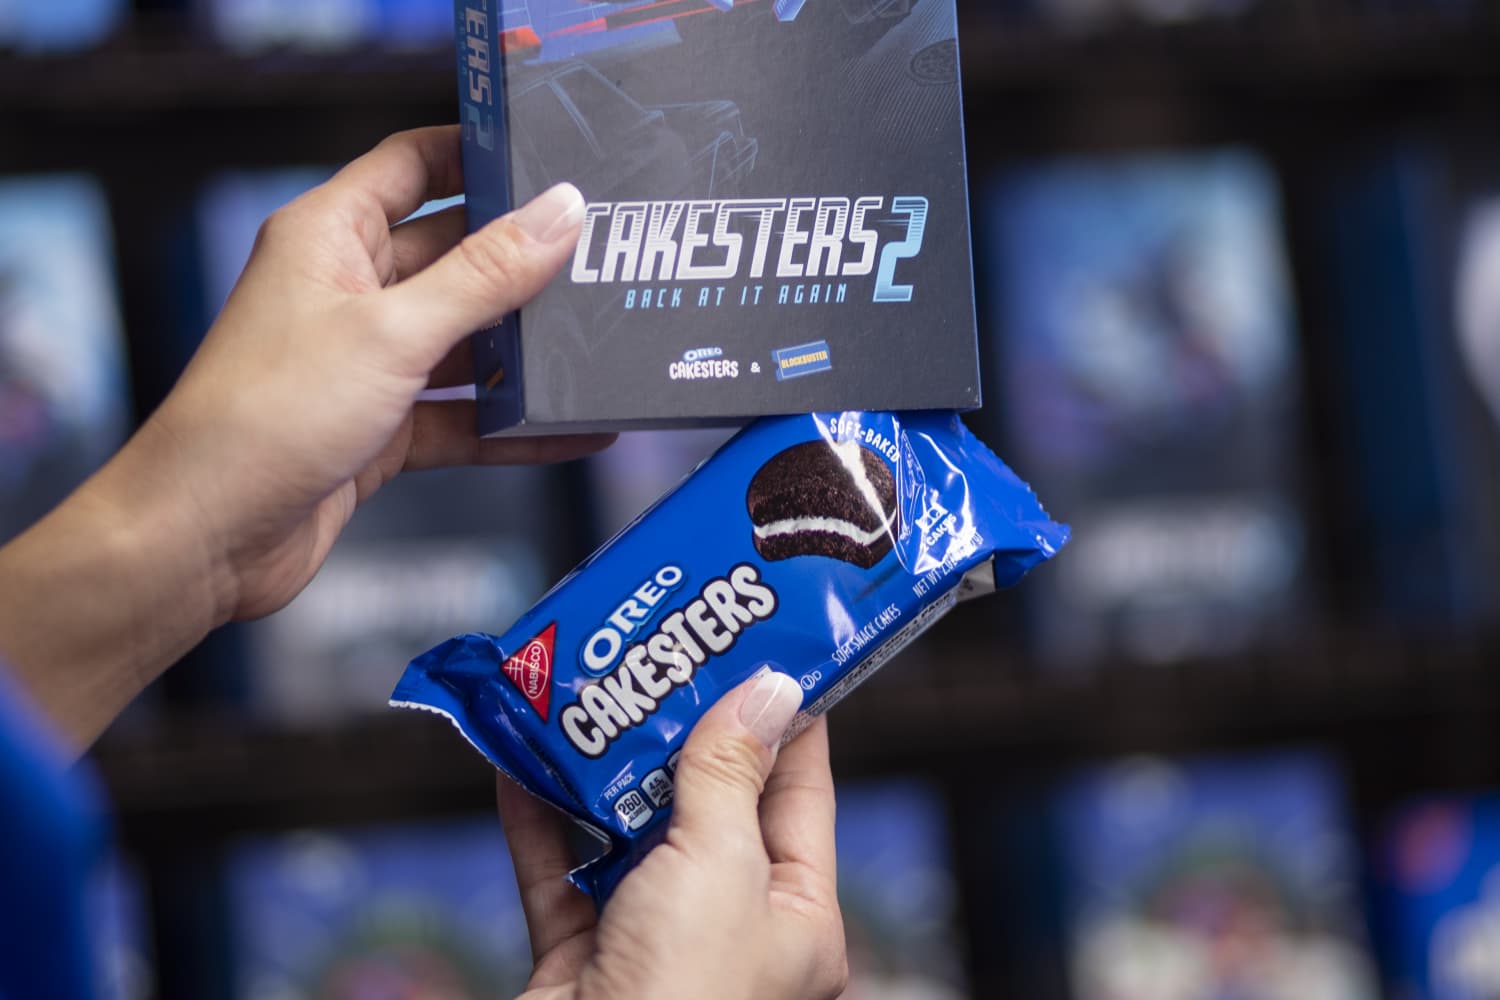 Oreo Snack cakesters, Soft Delivery or Pickup Near Me 2022